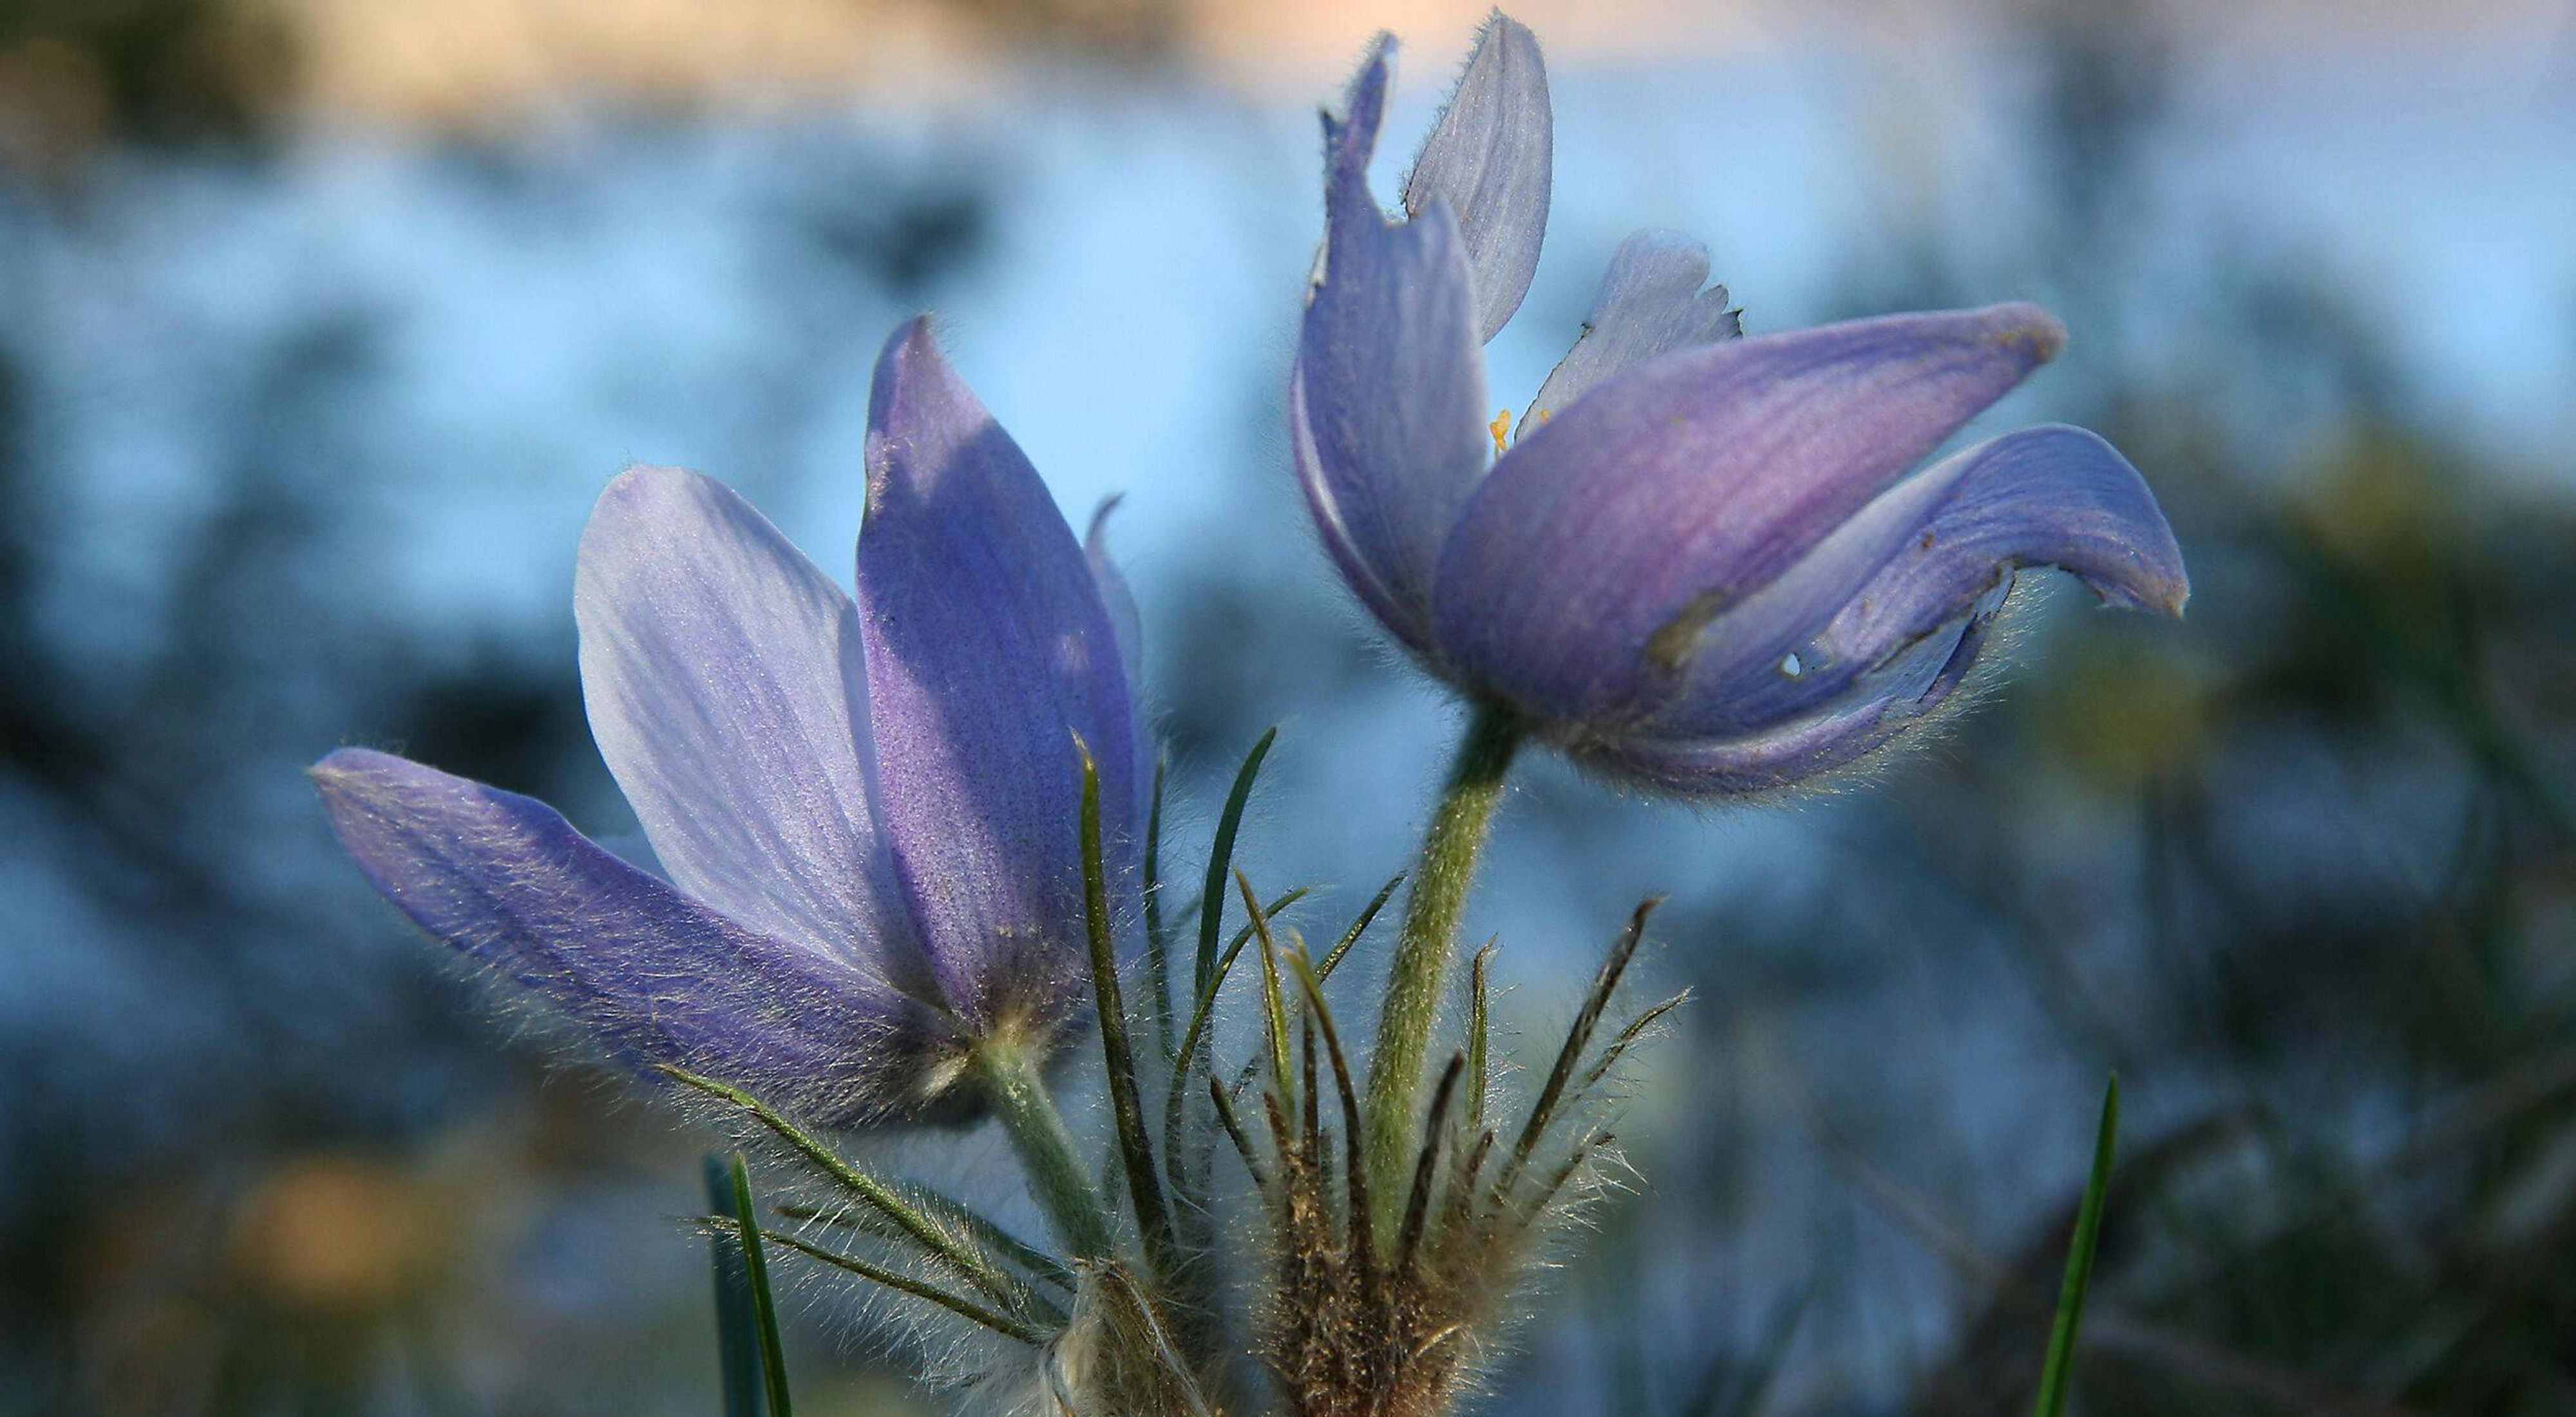 A closeup of two pasqueflowers in bloom.